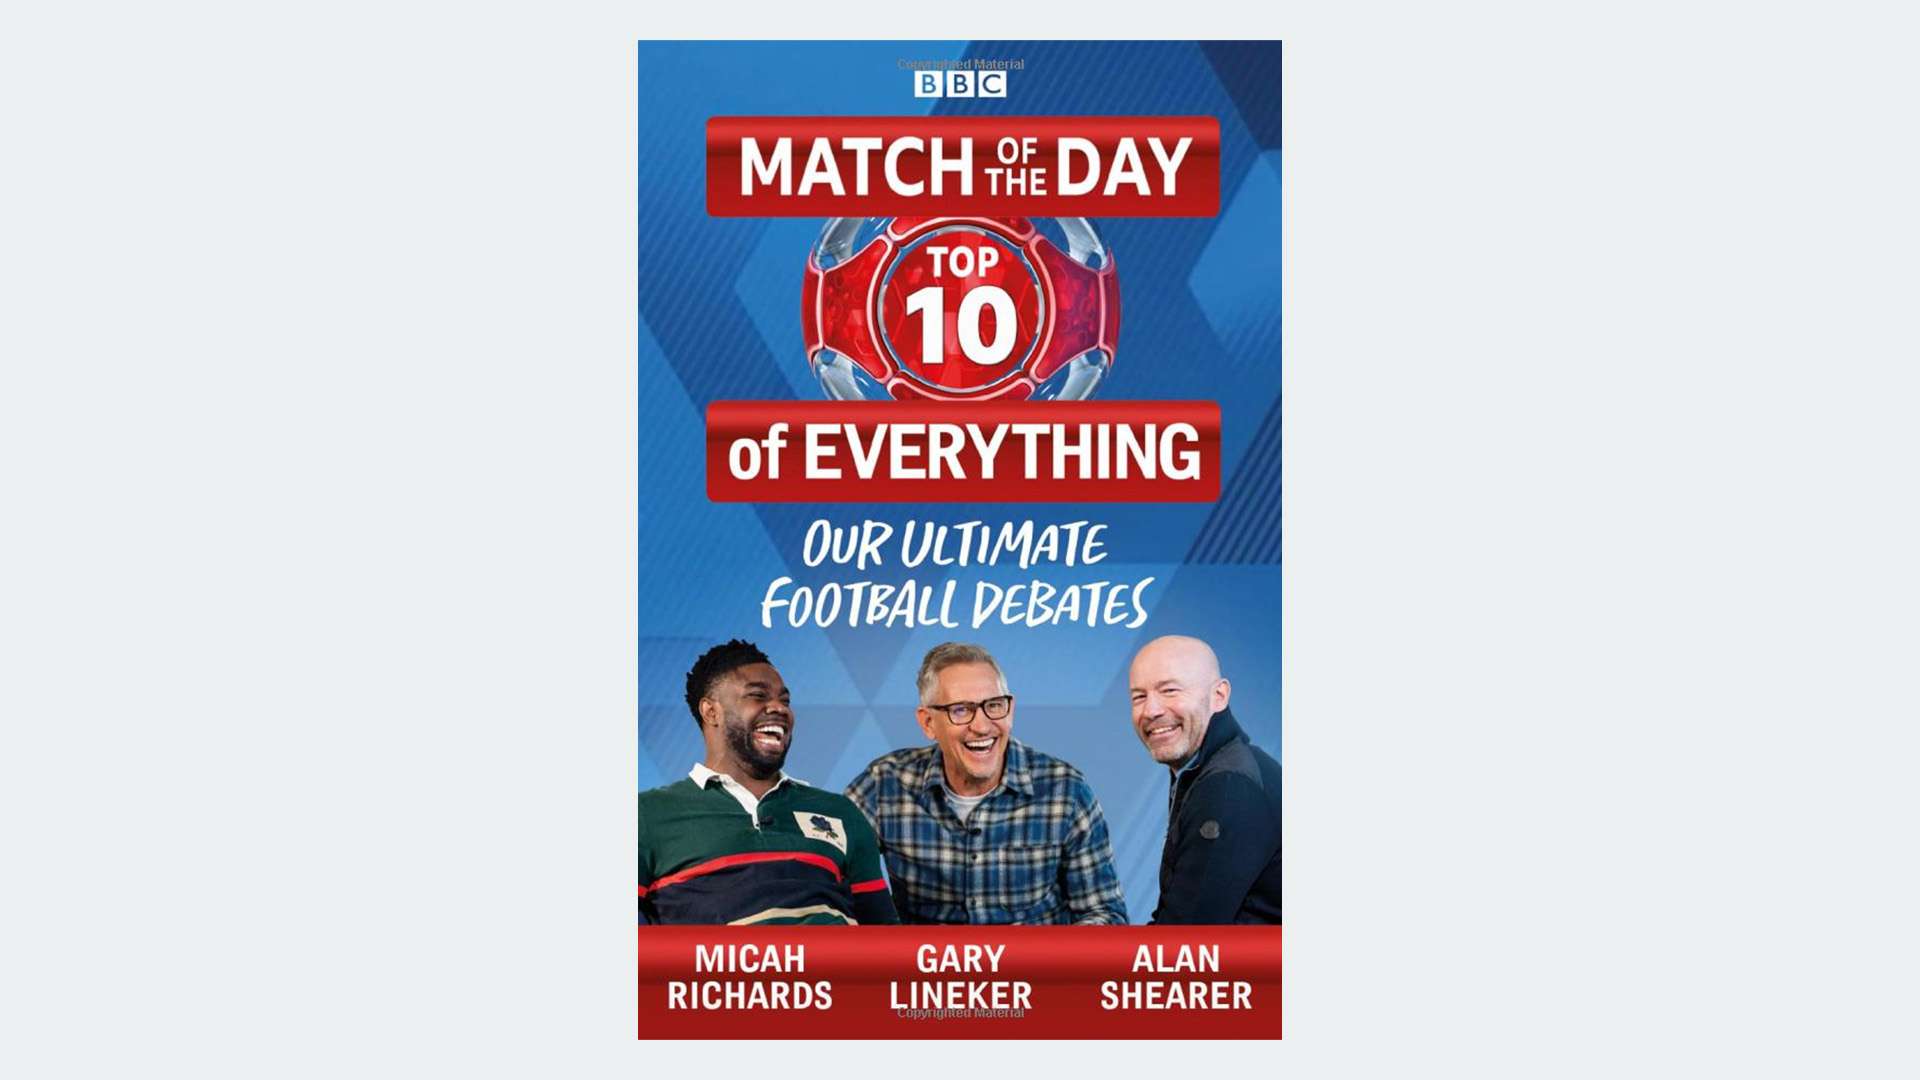 Match of the Day: Top 10 of Everything: Our Ultimate Football Debates by Micah Richards, Gary Lineker and Alan Shearer